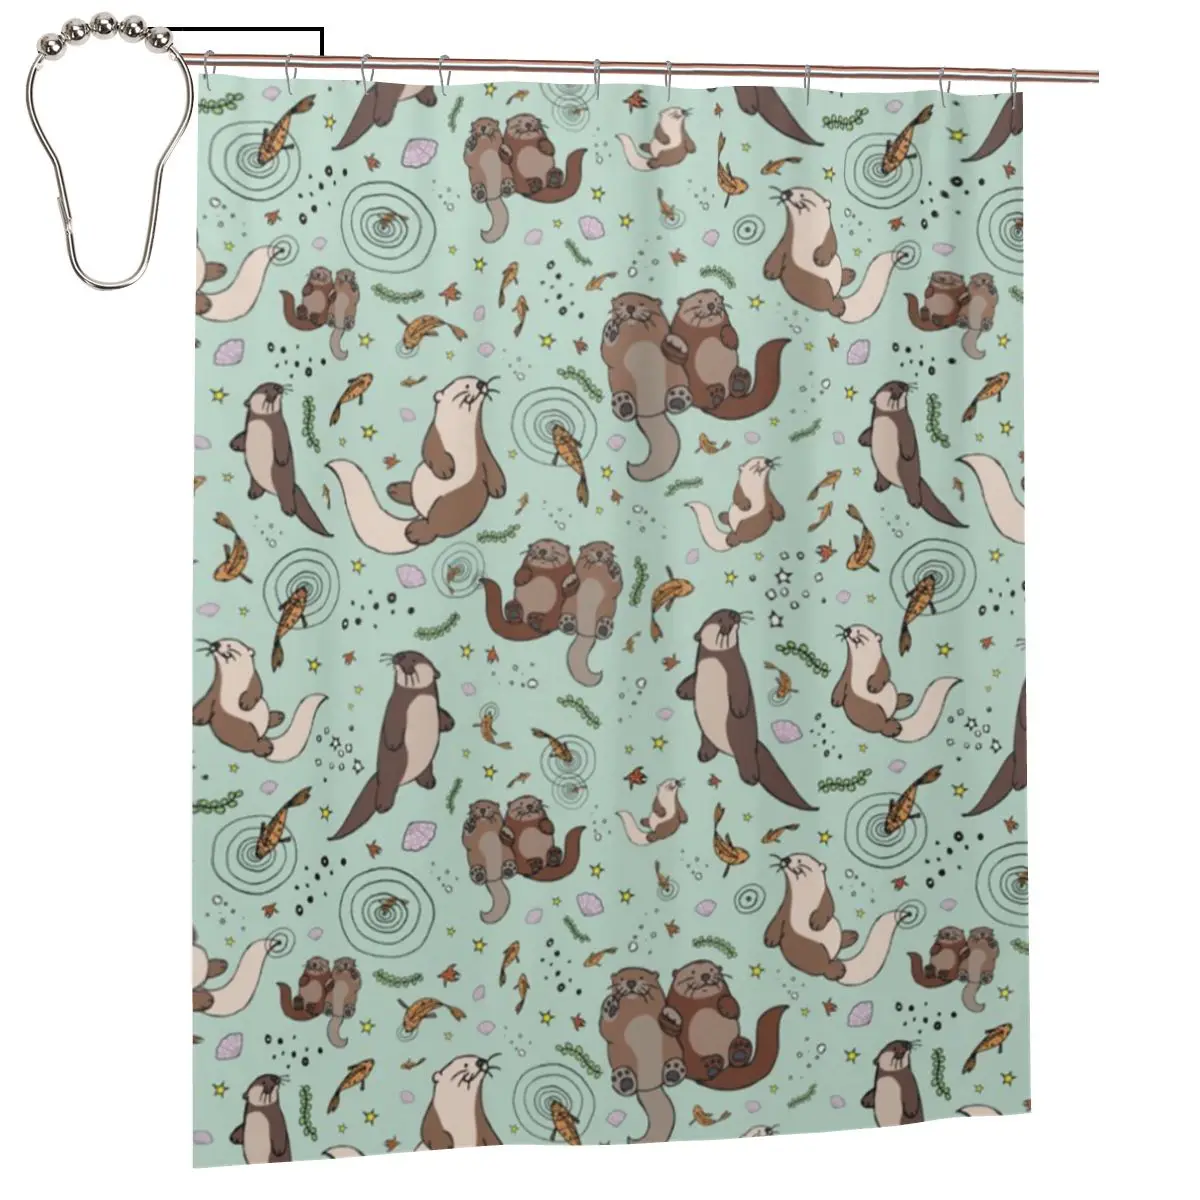 

Sea Otters Shower Curtain for Bathroon Personalized Funny Bath Curtain Set with Iron Hooks Home Decor Gift 60x72in